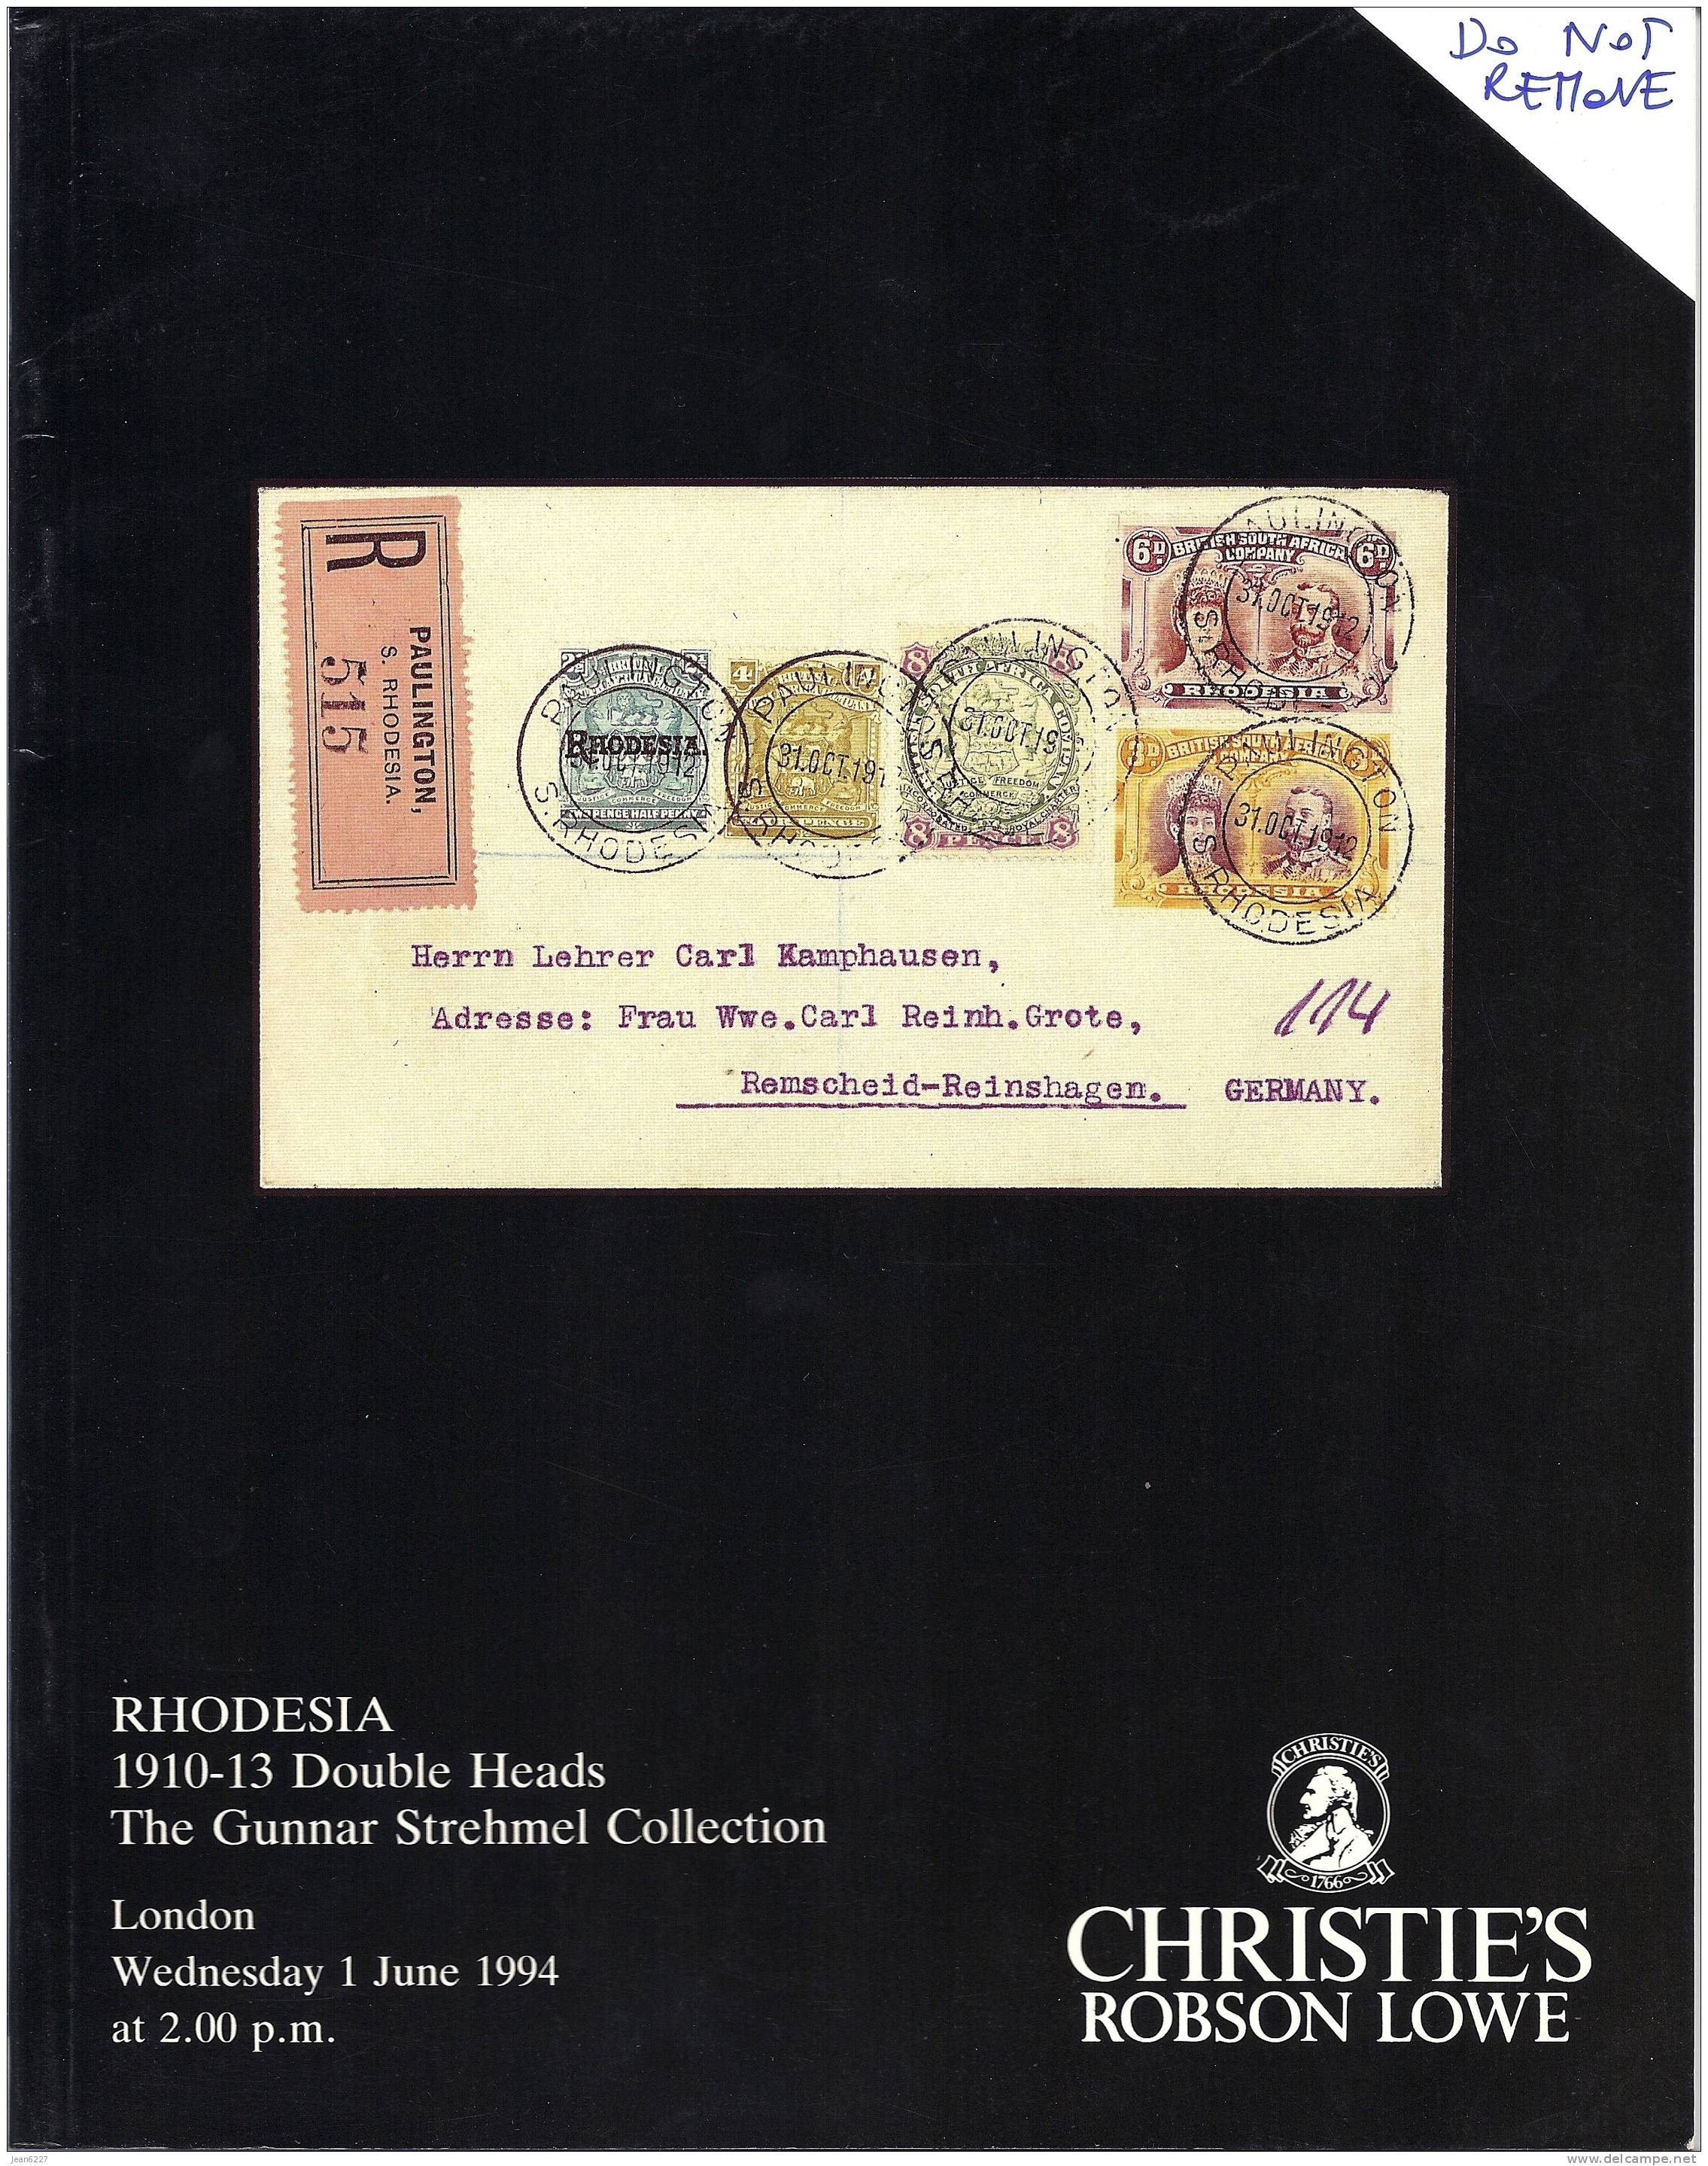 Christies - Rhodesia Stamps - Catalogues For Auction Houses